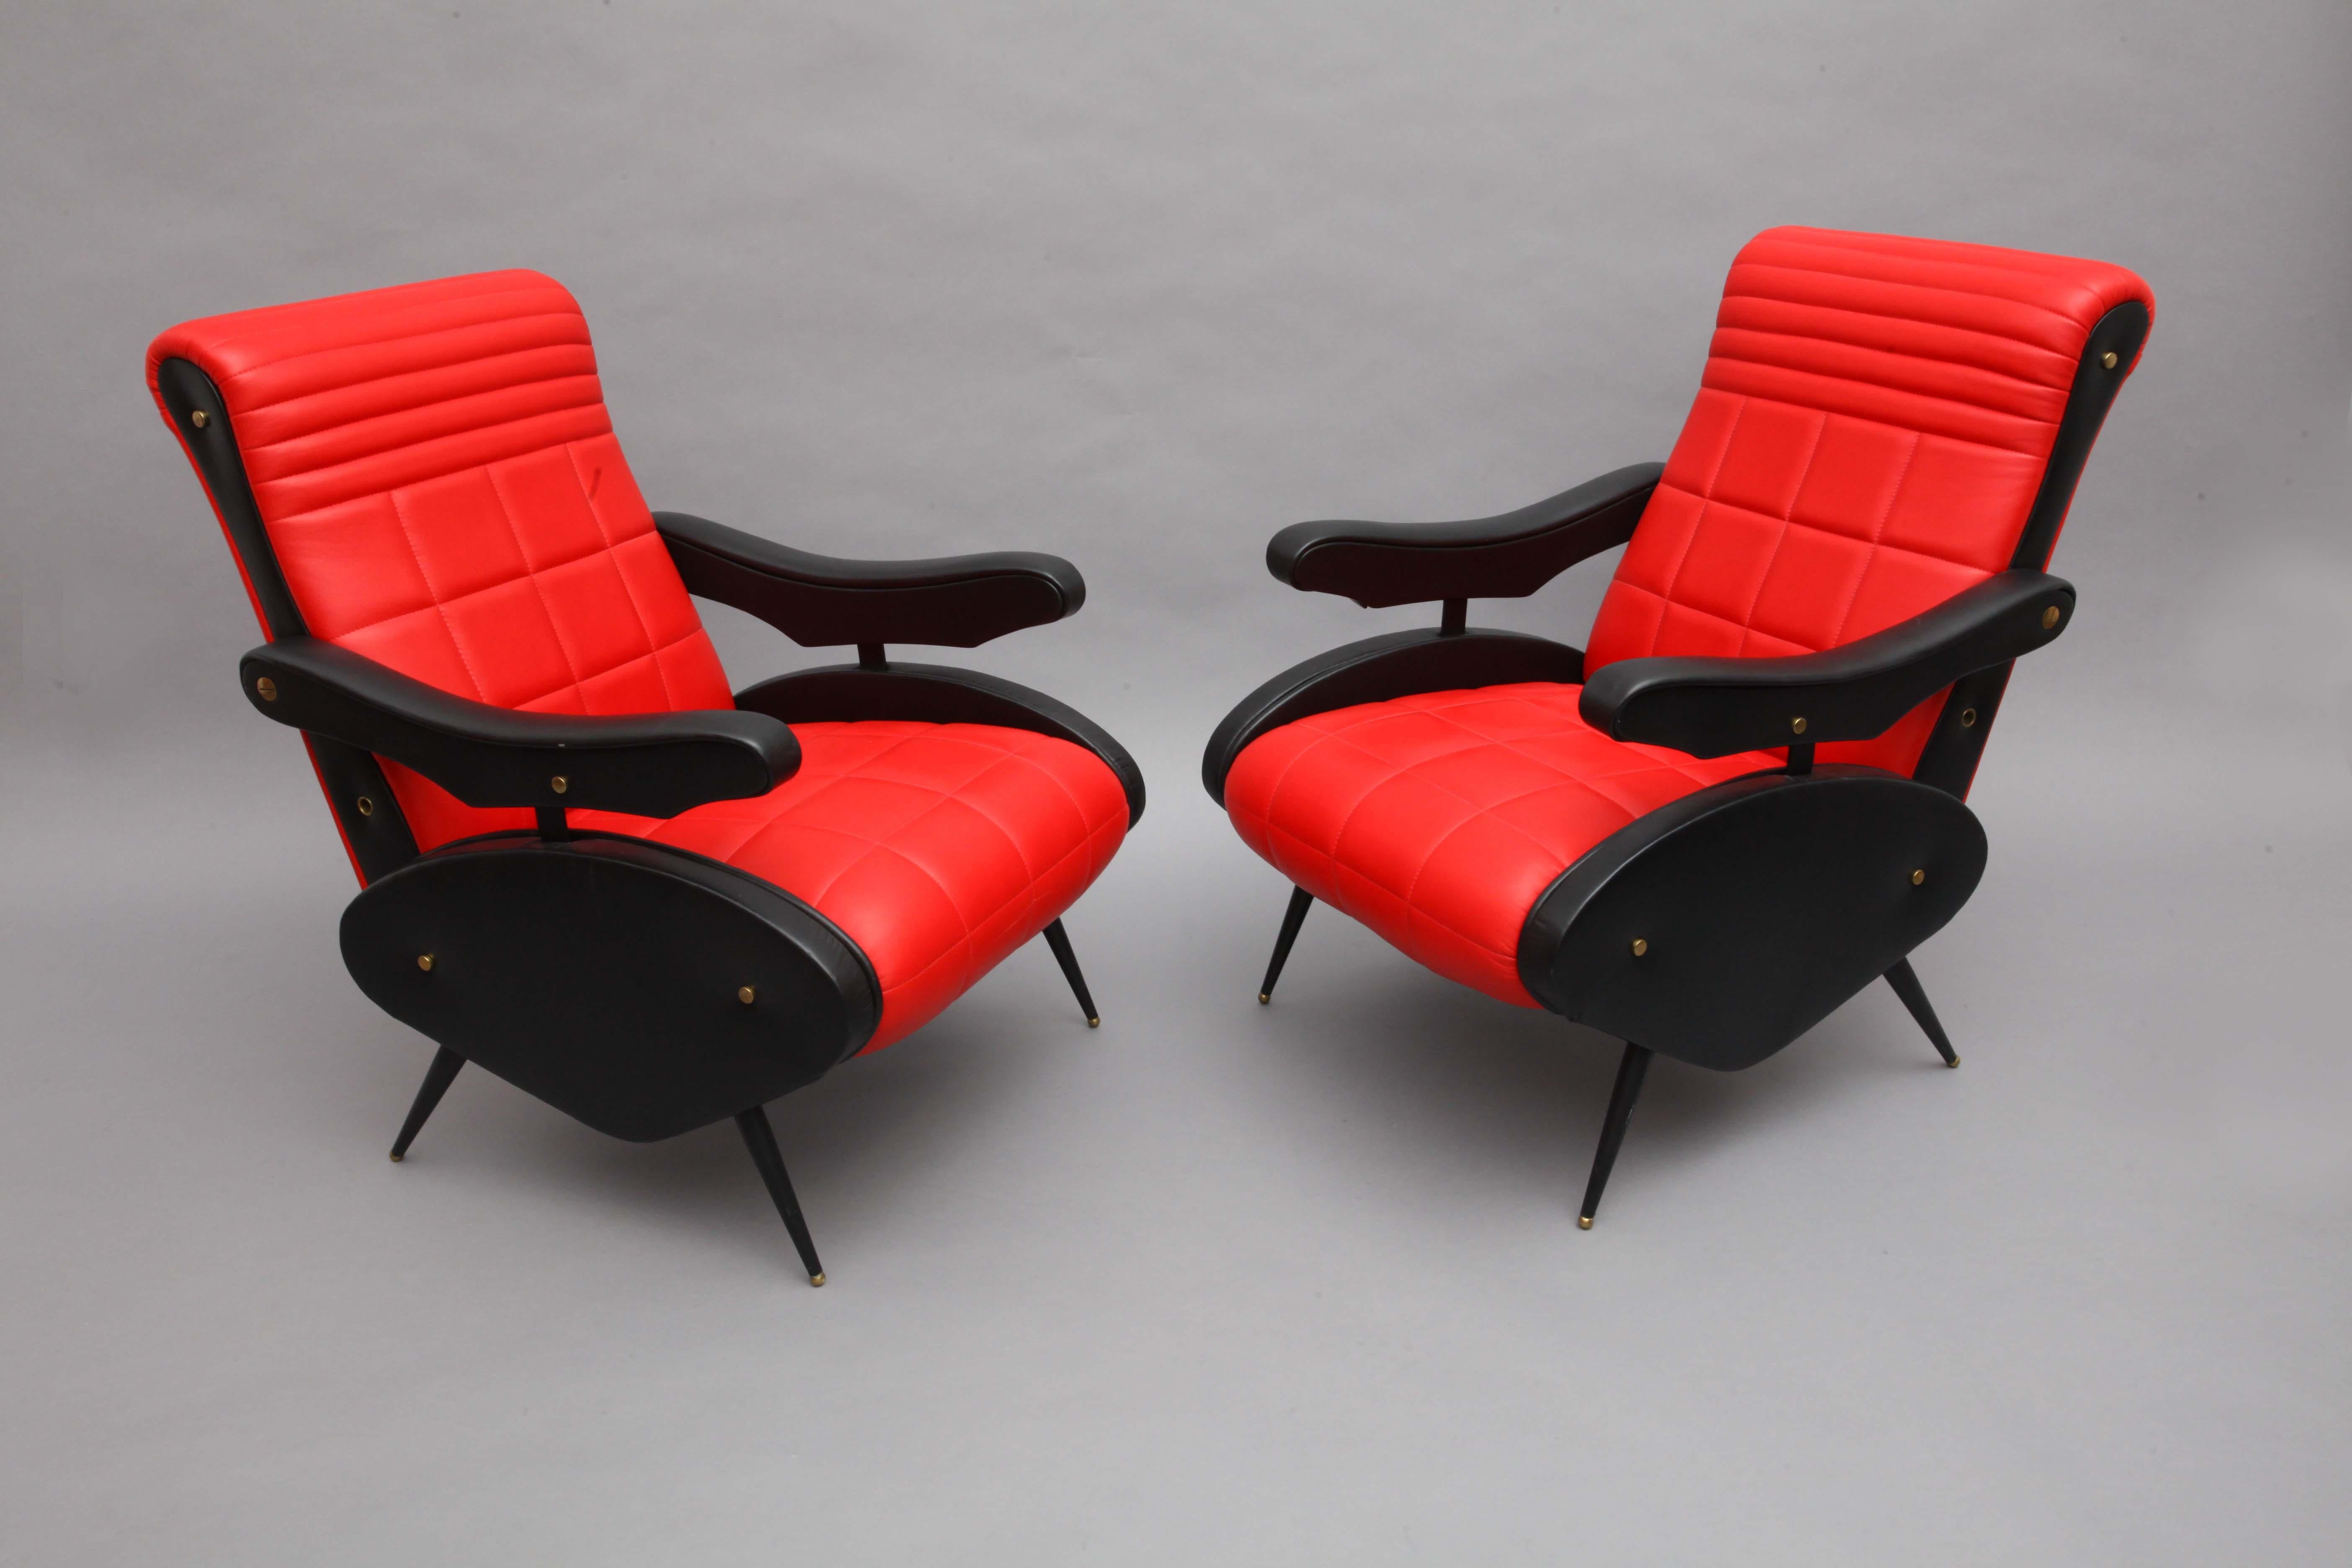 Two armchairs,
Style of Marco Zanuso,
Italy, 1958.
Adjustable armchairs,
black and red leather, 
black legs with brass shoes.